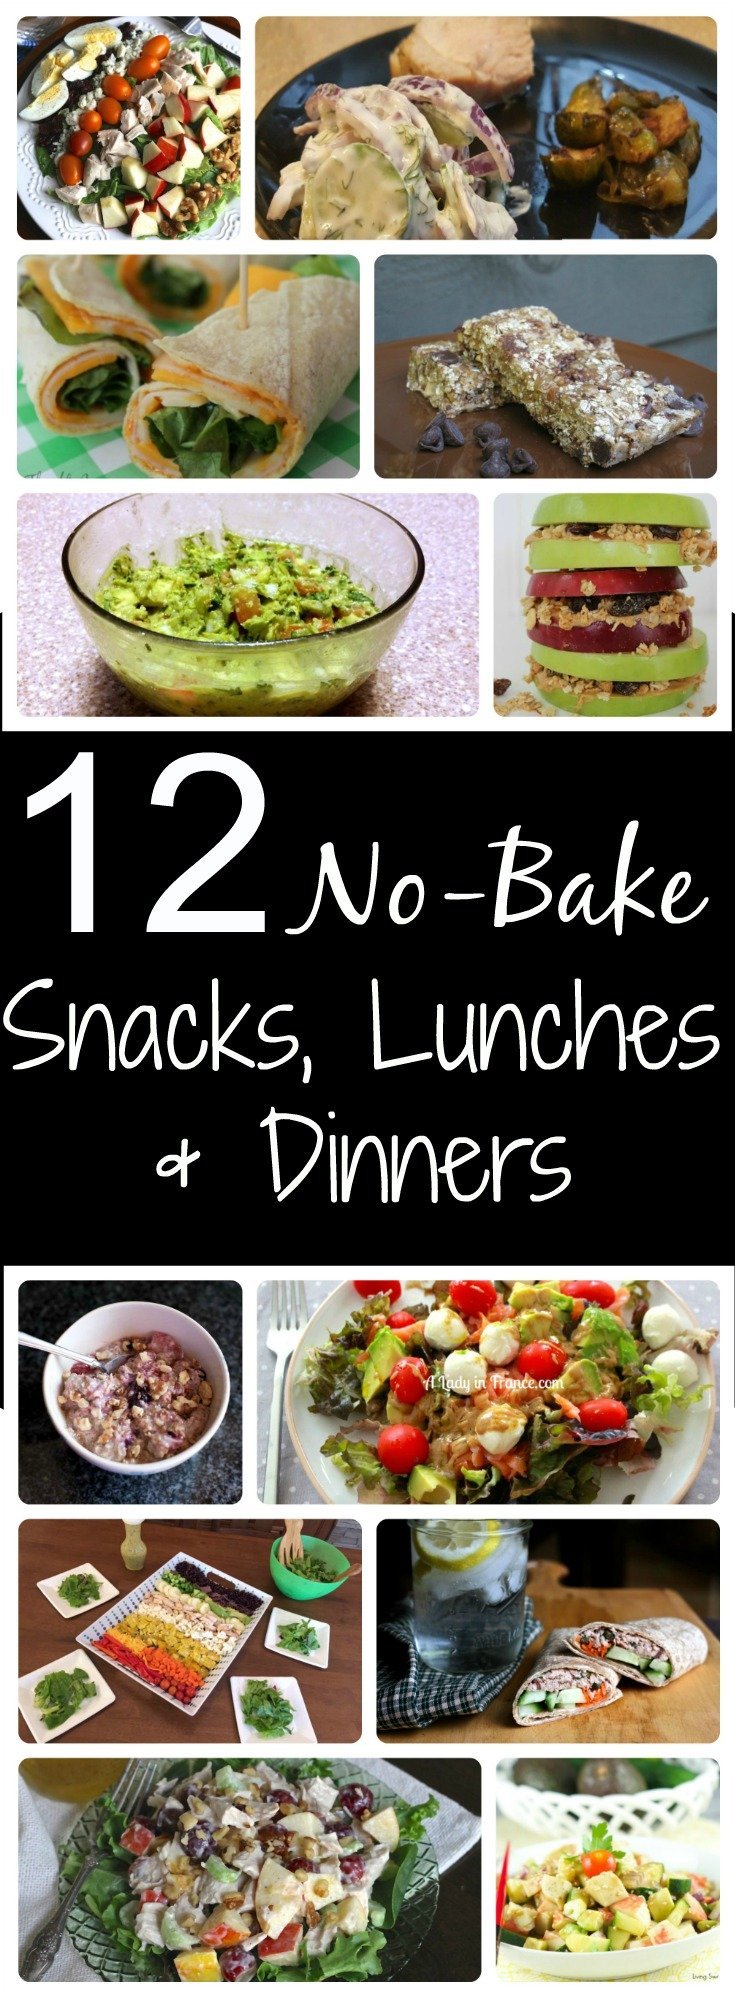 12 No-Bake/no-cook Snacks, lunches & Dinners for the days when cooking is just too much!